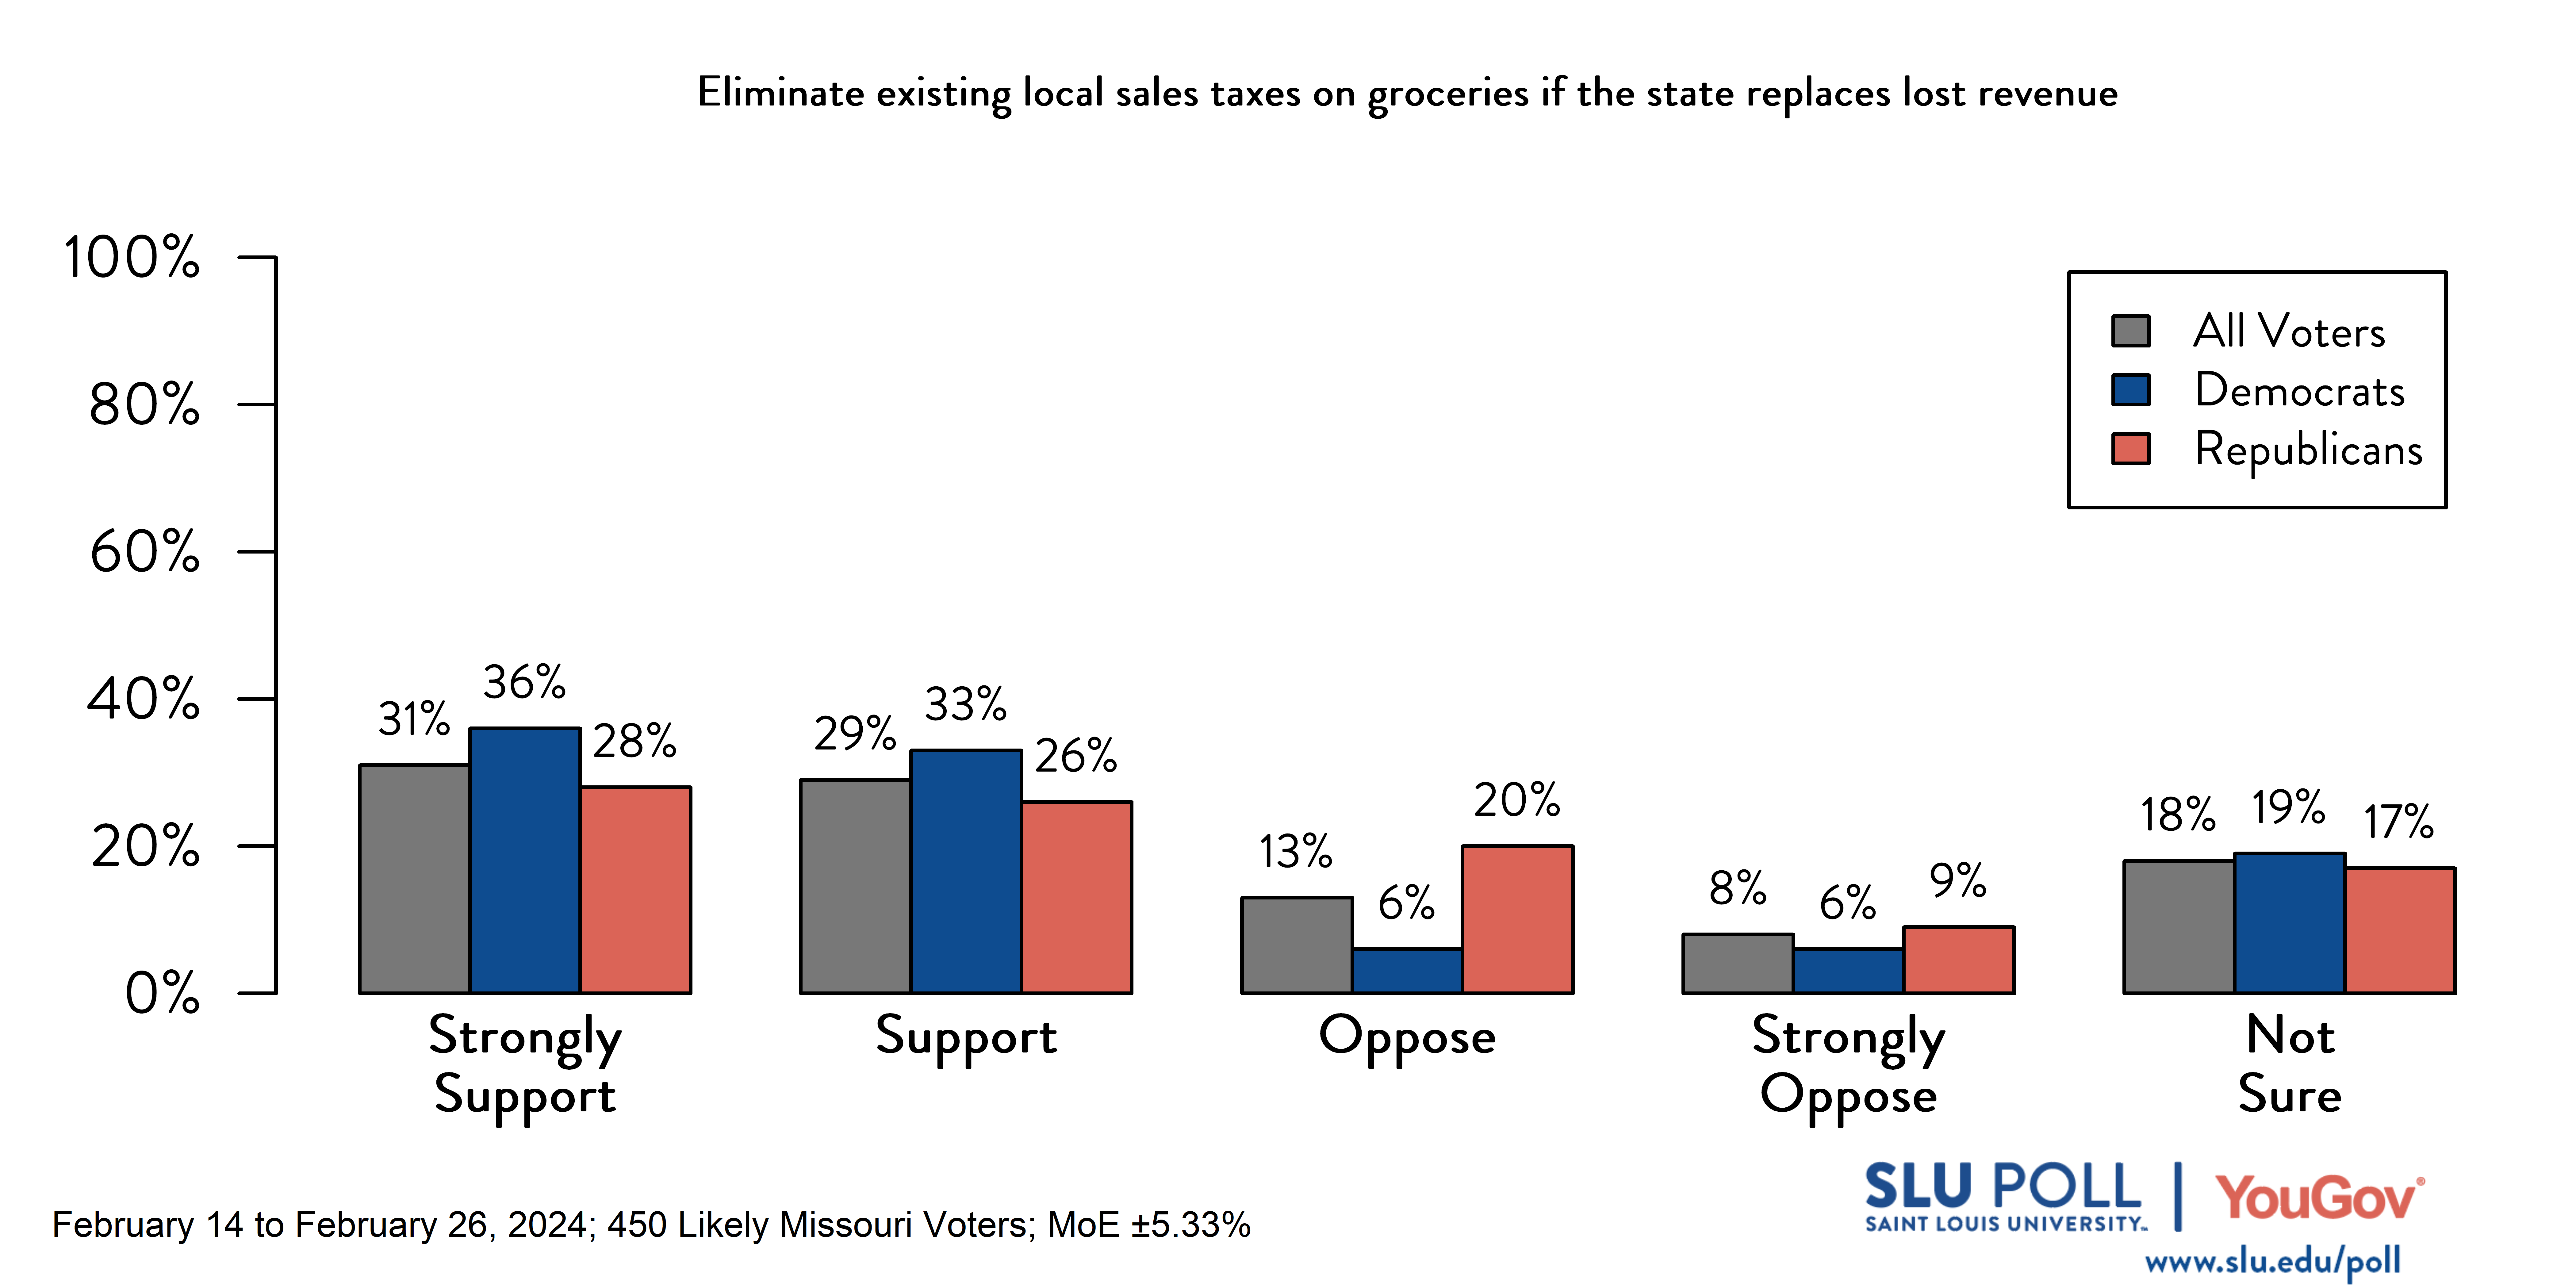 Likely voters' responses to 'Do you support the following policies…Eliminate existing local sale taxes on groceries if the state replaces lost revenue for local governments?': 31% Strongly support, 29% Support, 13% Oppose, 8% Strongly oppose, and 18% Not sure. Democratic voters' responses: ' 36% Strongly support, 33% Support, 6% Oppose, 6% Strongly oppose, and 19% Not sure. Republican voters' responses:  28% Strongly support, 26% Support, 20% Oppose, 9% Strongly oppose, and 17% Not sure.